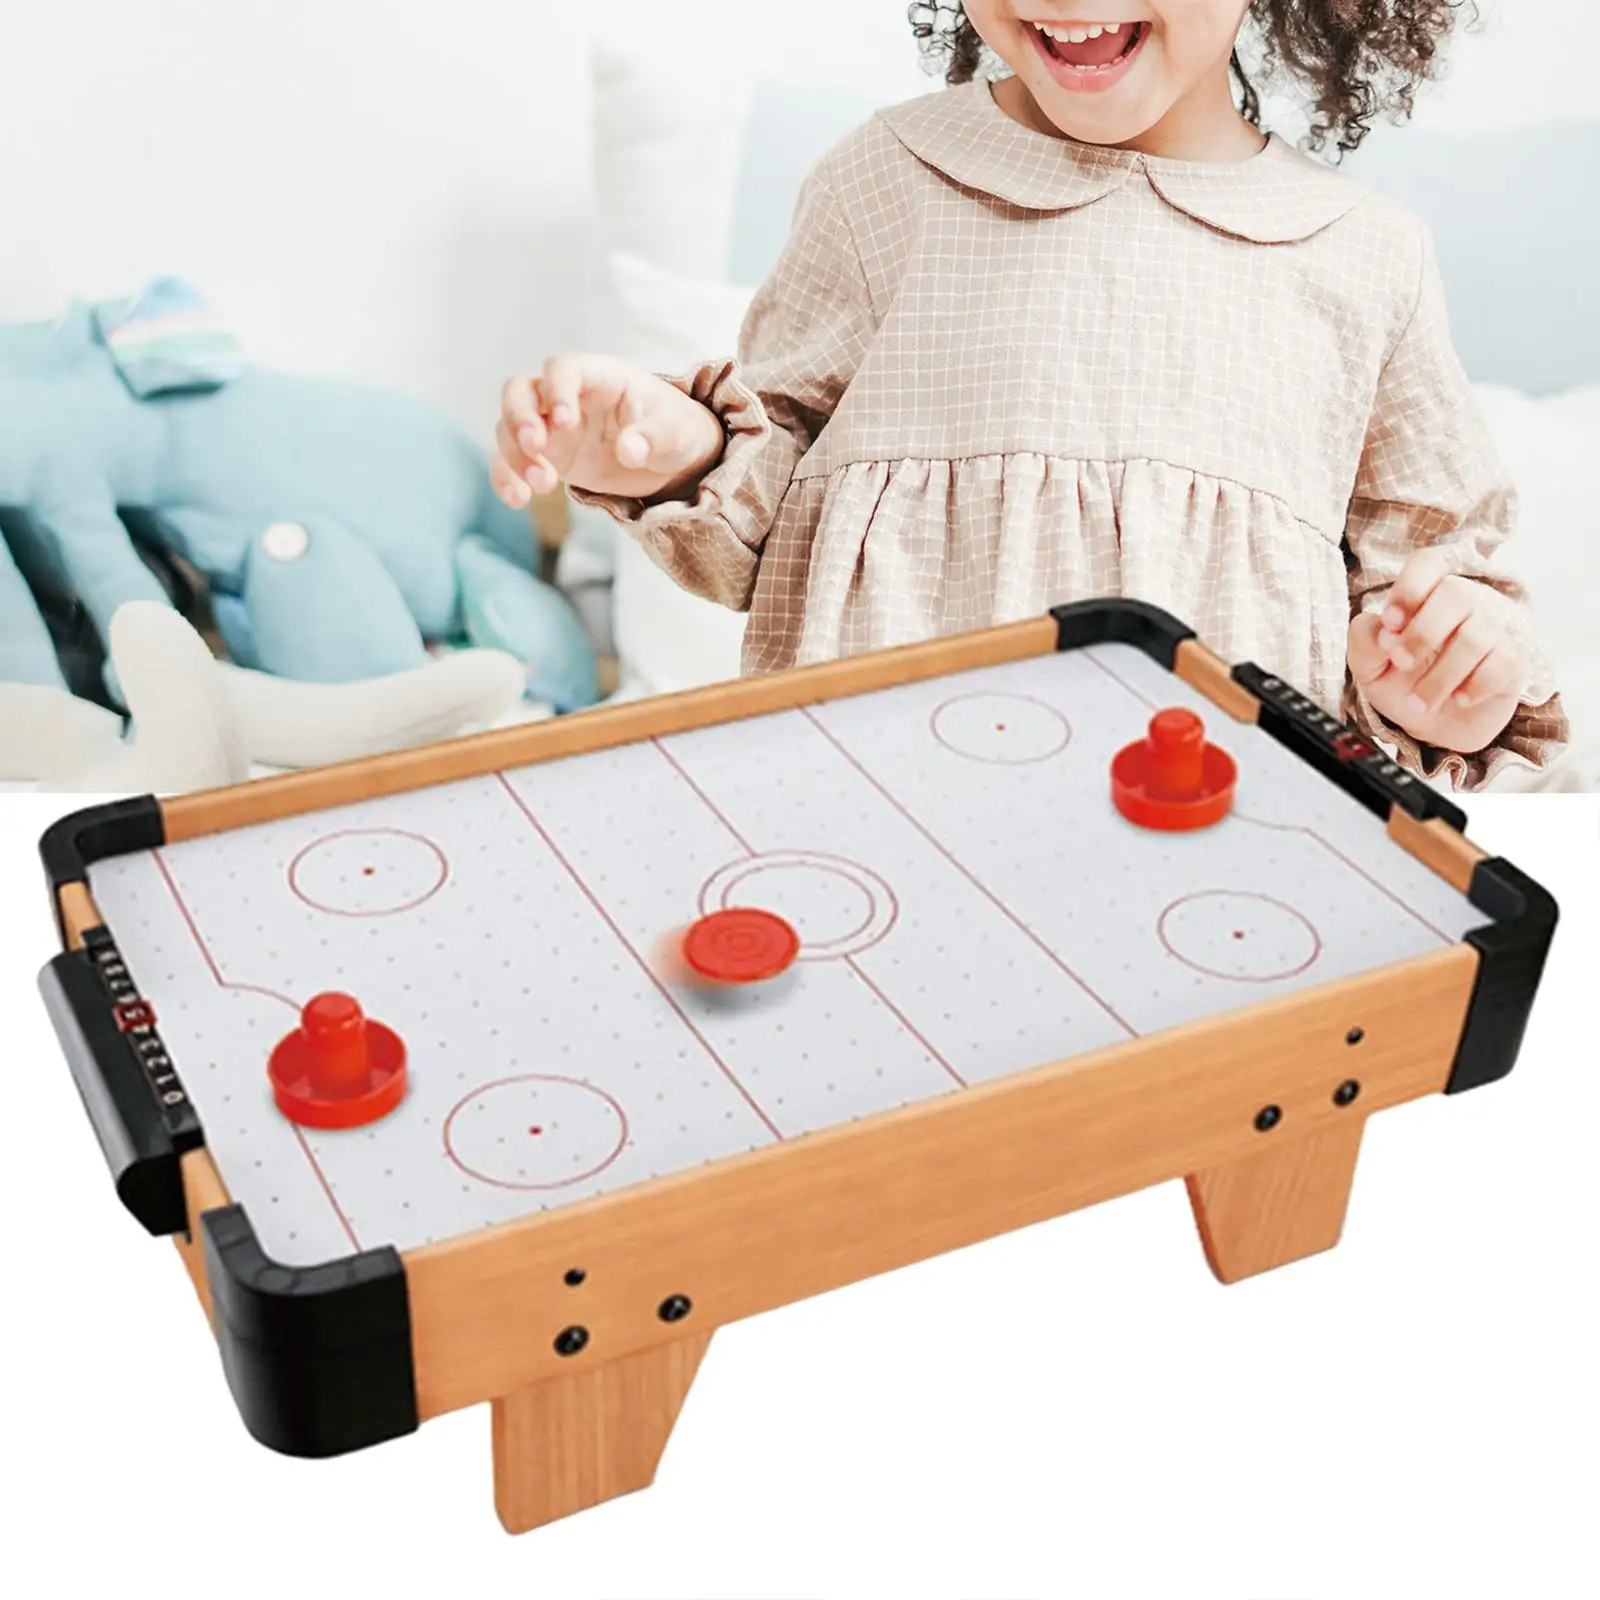 Air Hockey Board Game with Sliders and Pucks,Parent Child Interactive Family Game for Girls Boys